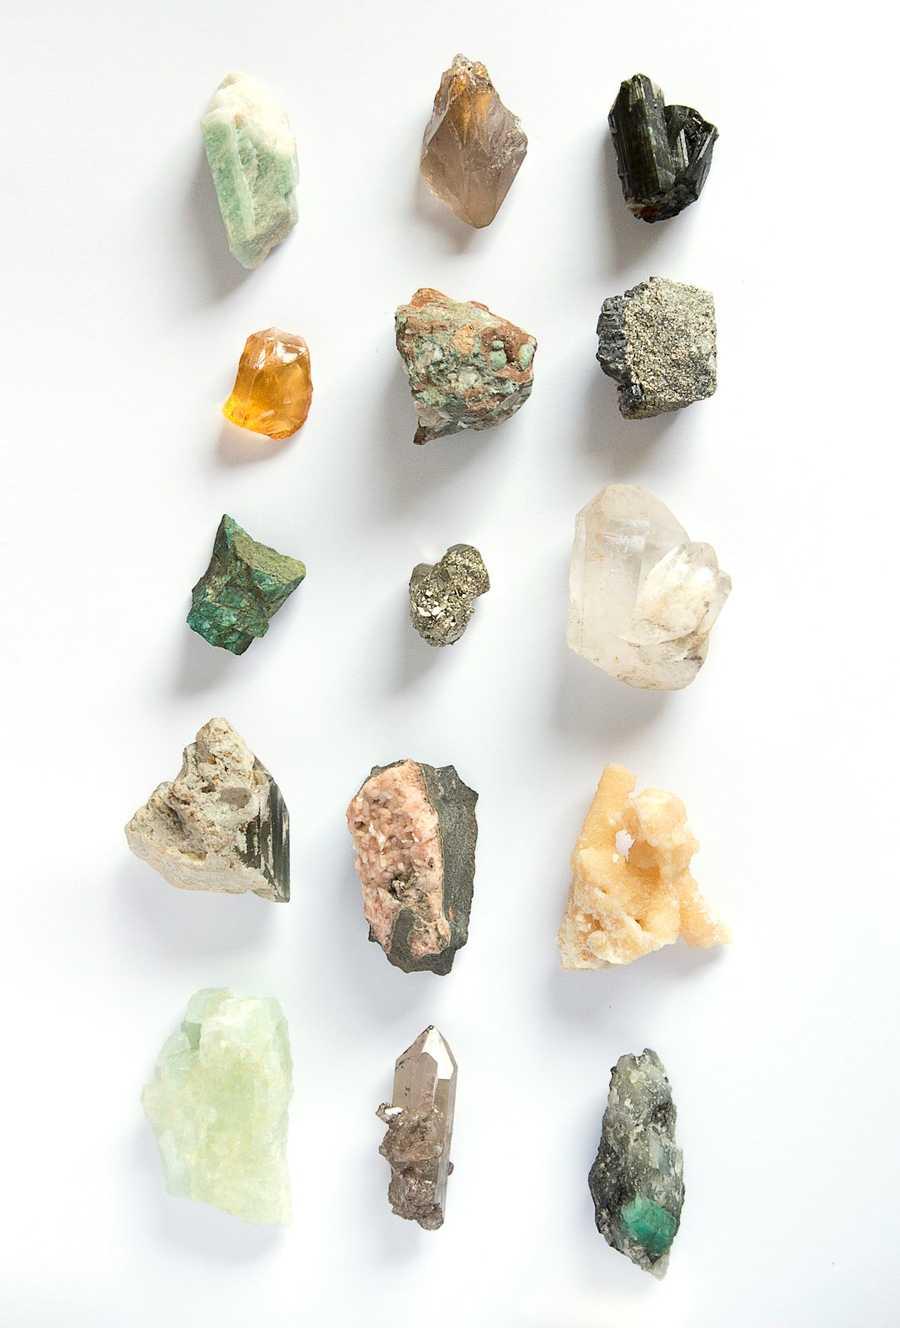 Crystals & Their Unique Qualities